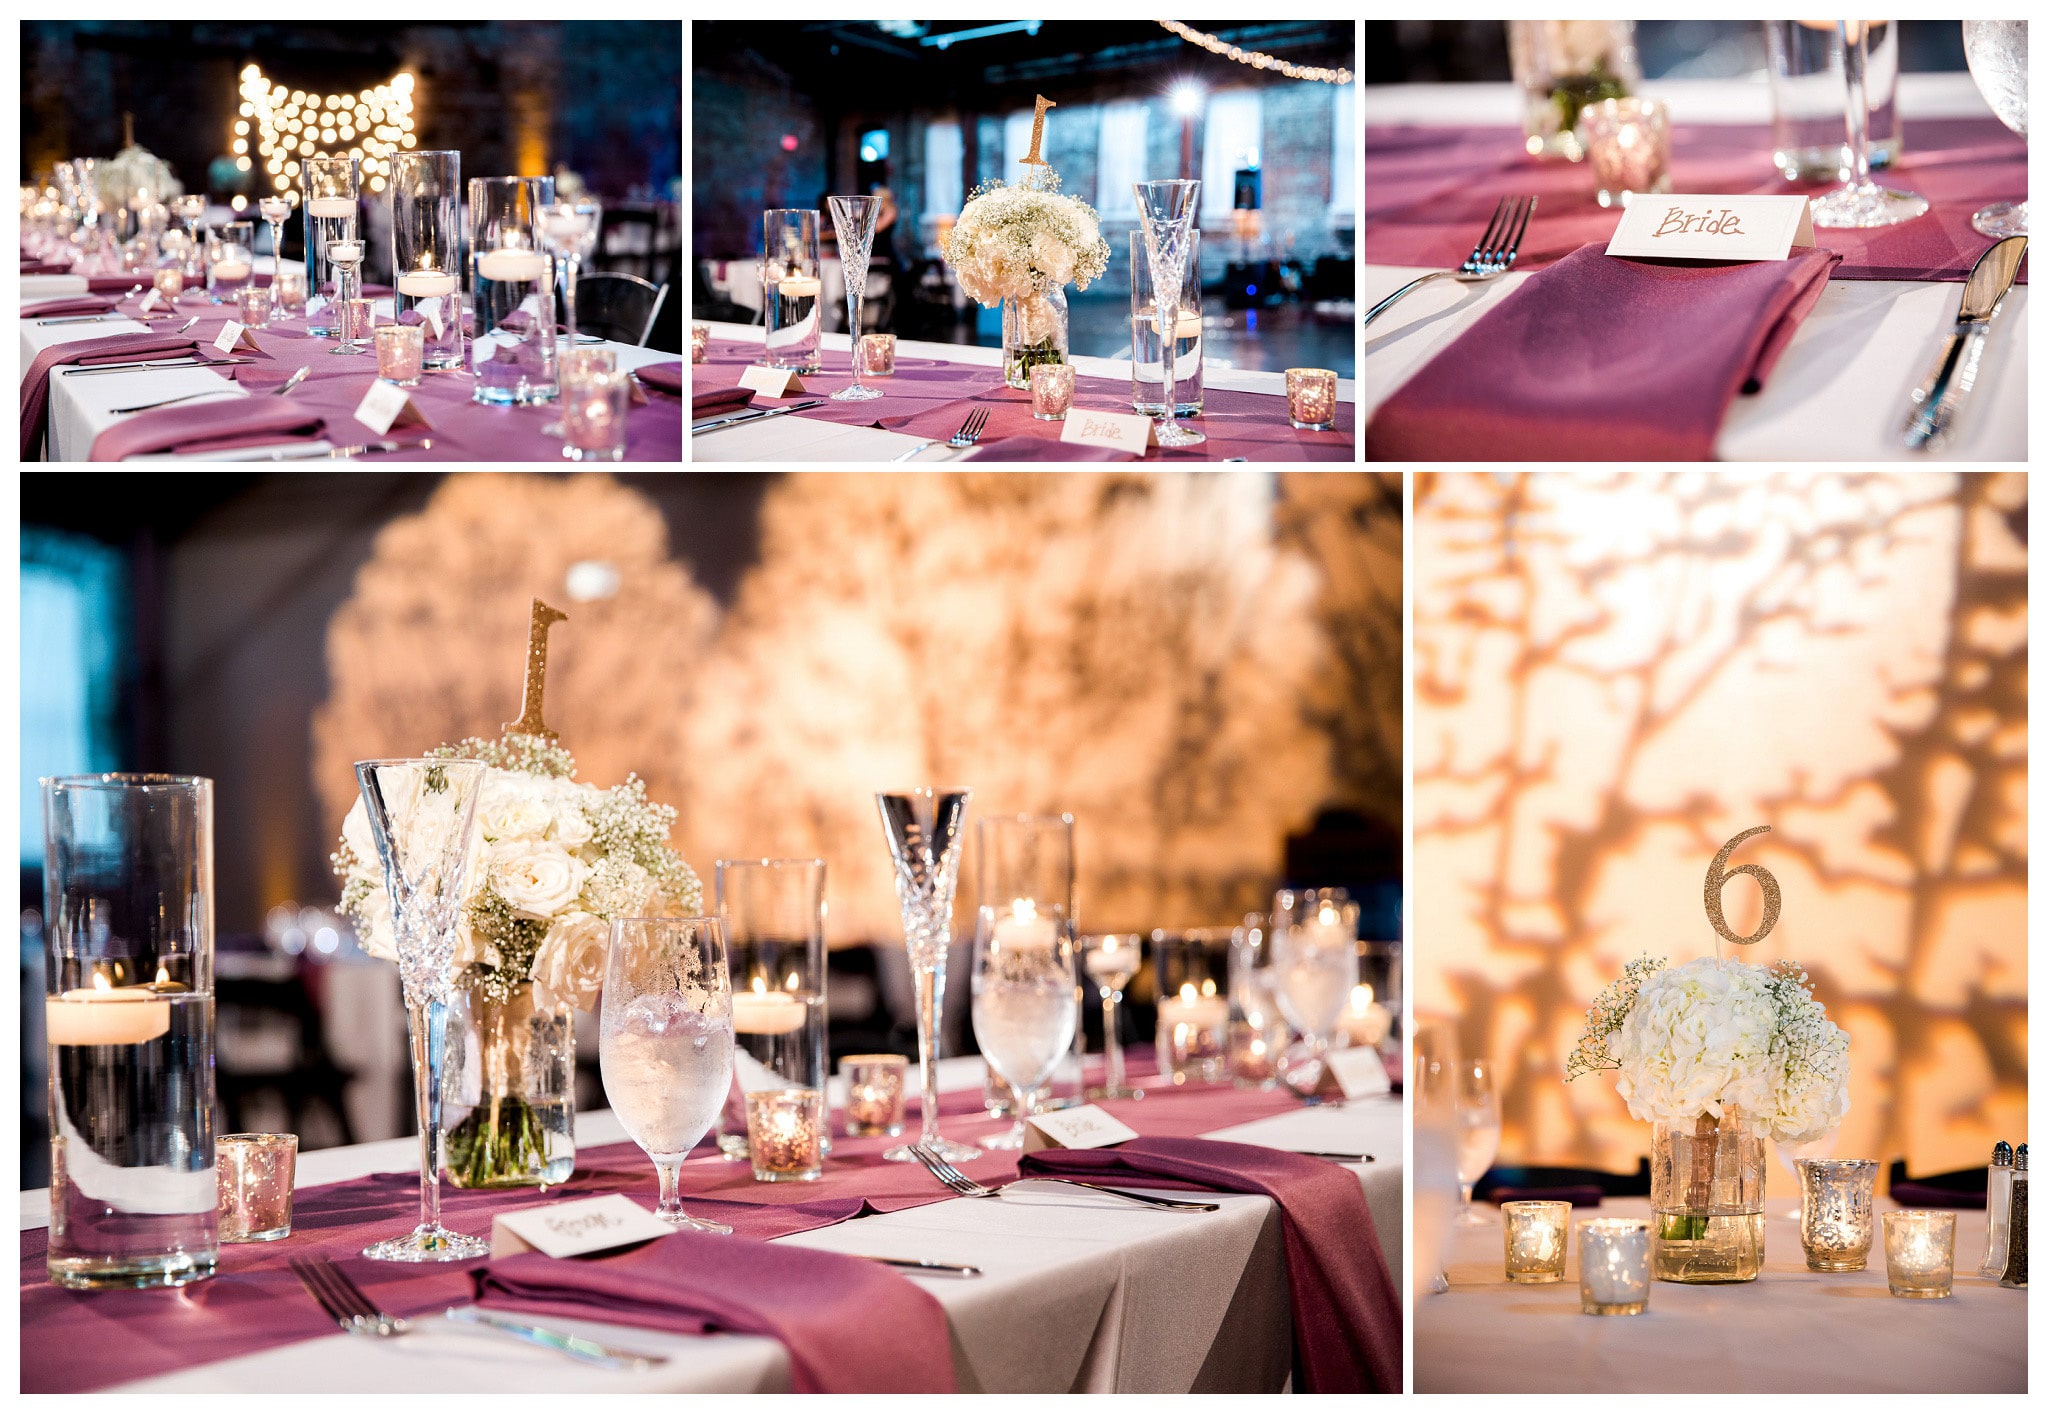 Amazing Reception, Beautifully arranged and decorated - Venue and Catering – King plow Event Gallery and Bold American Events Decor and flowers – Stylish Stems Music and Band – Seven Sharp Nine Transportation – Georgia Trolley Photographer One Life Photography